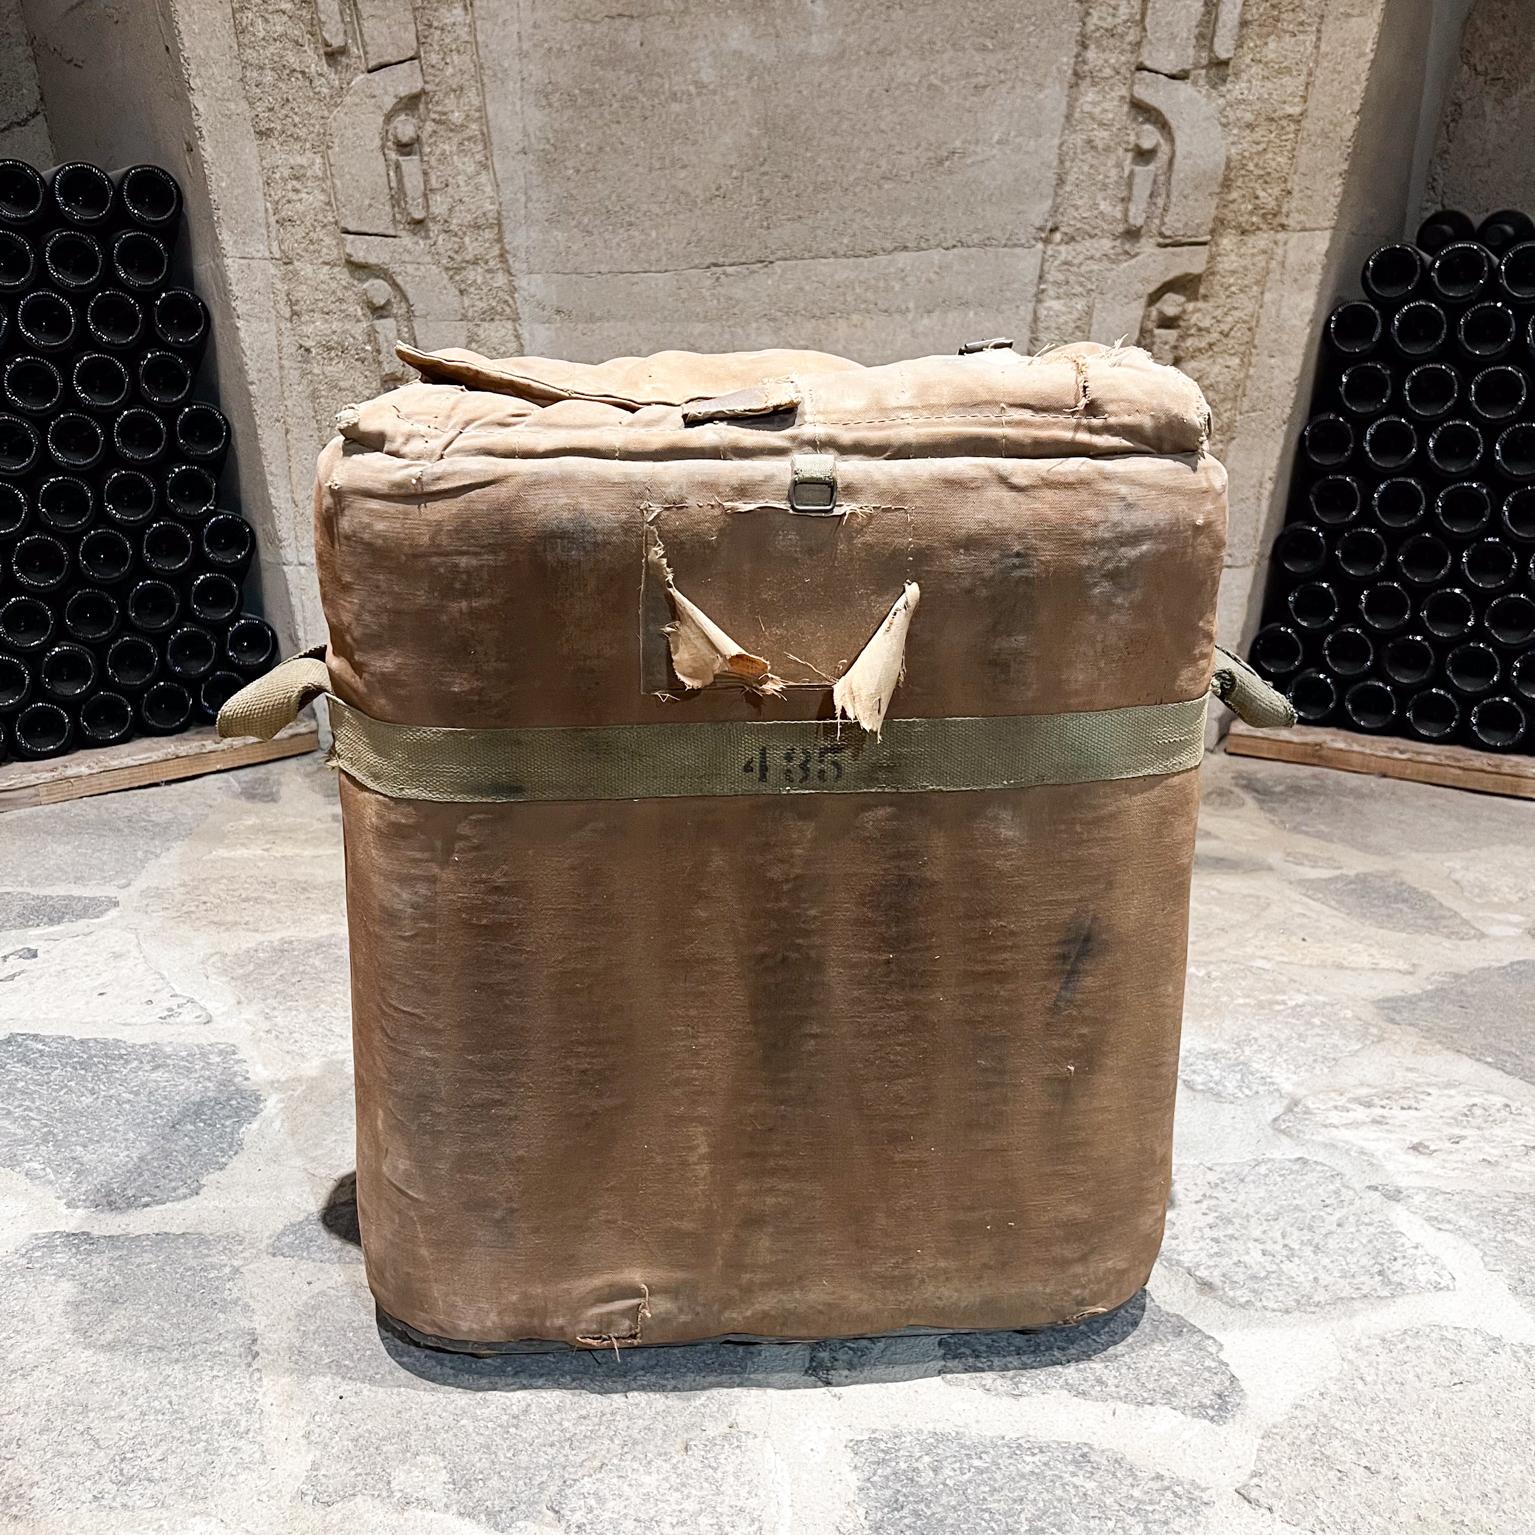 1940s Distressed Military Ice Bucket Portable Insulated Chest
US vintage military surplus ice cooler chest
designed in metal, canvas, cotton and leather 
23 h x 17.75 w x 11.25
Preowned original unrestored vintage distressed condition
Wear